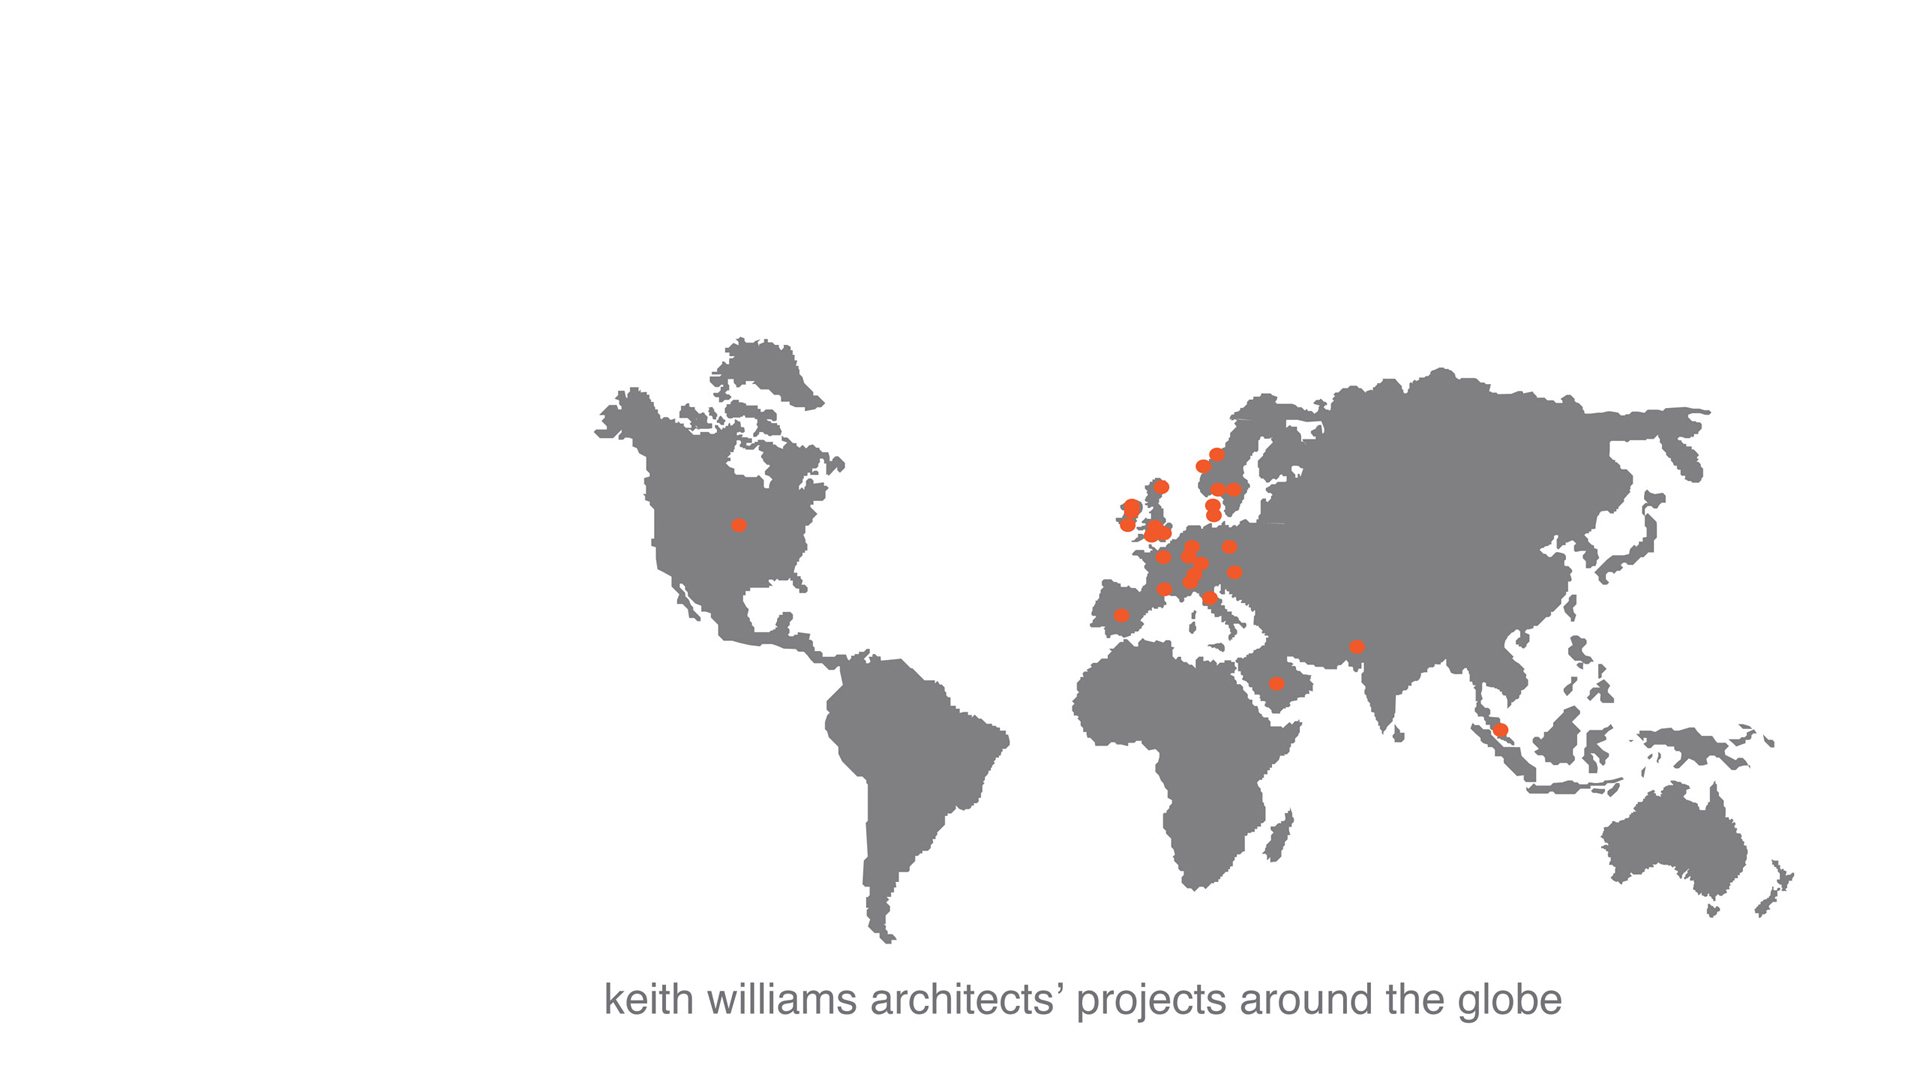 Keith Williams Architects' projects around the globe